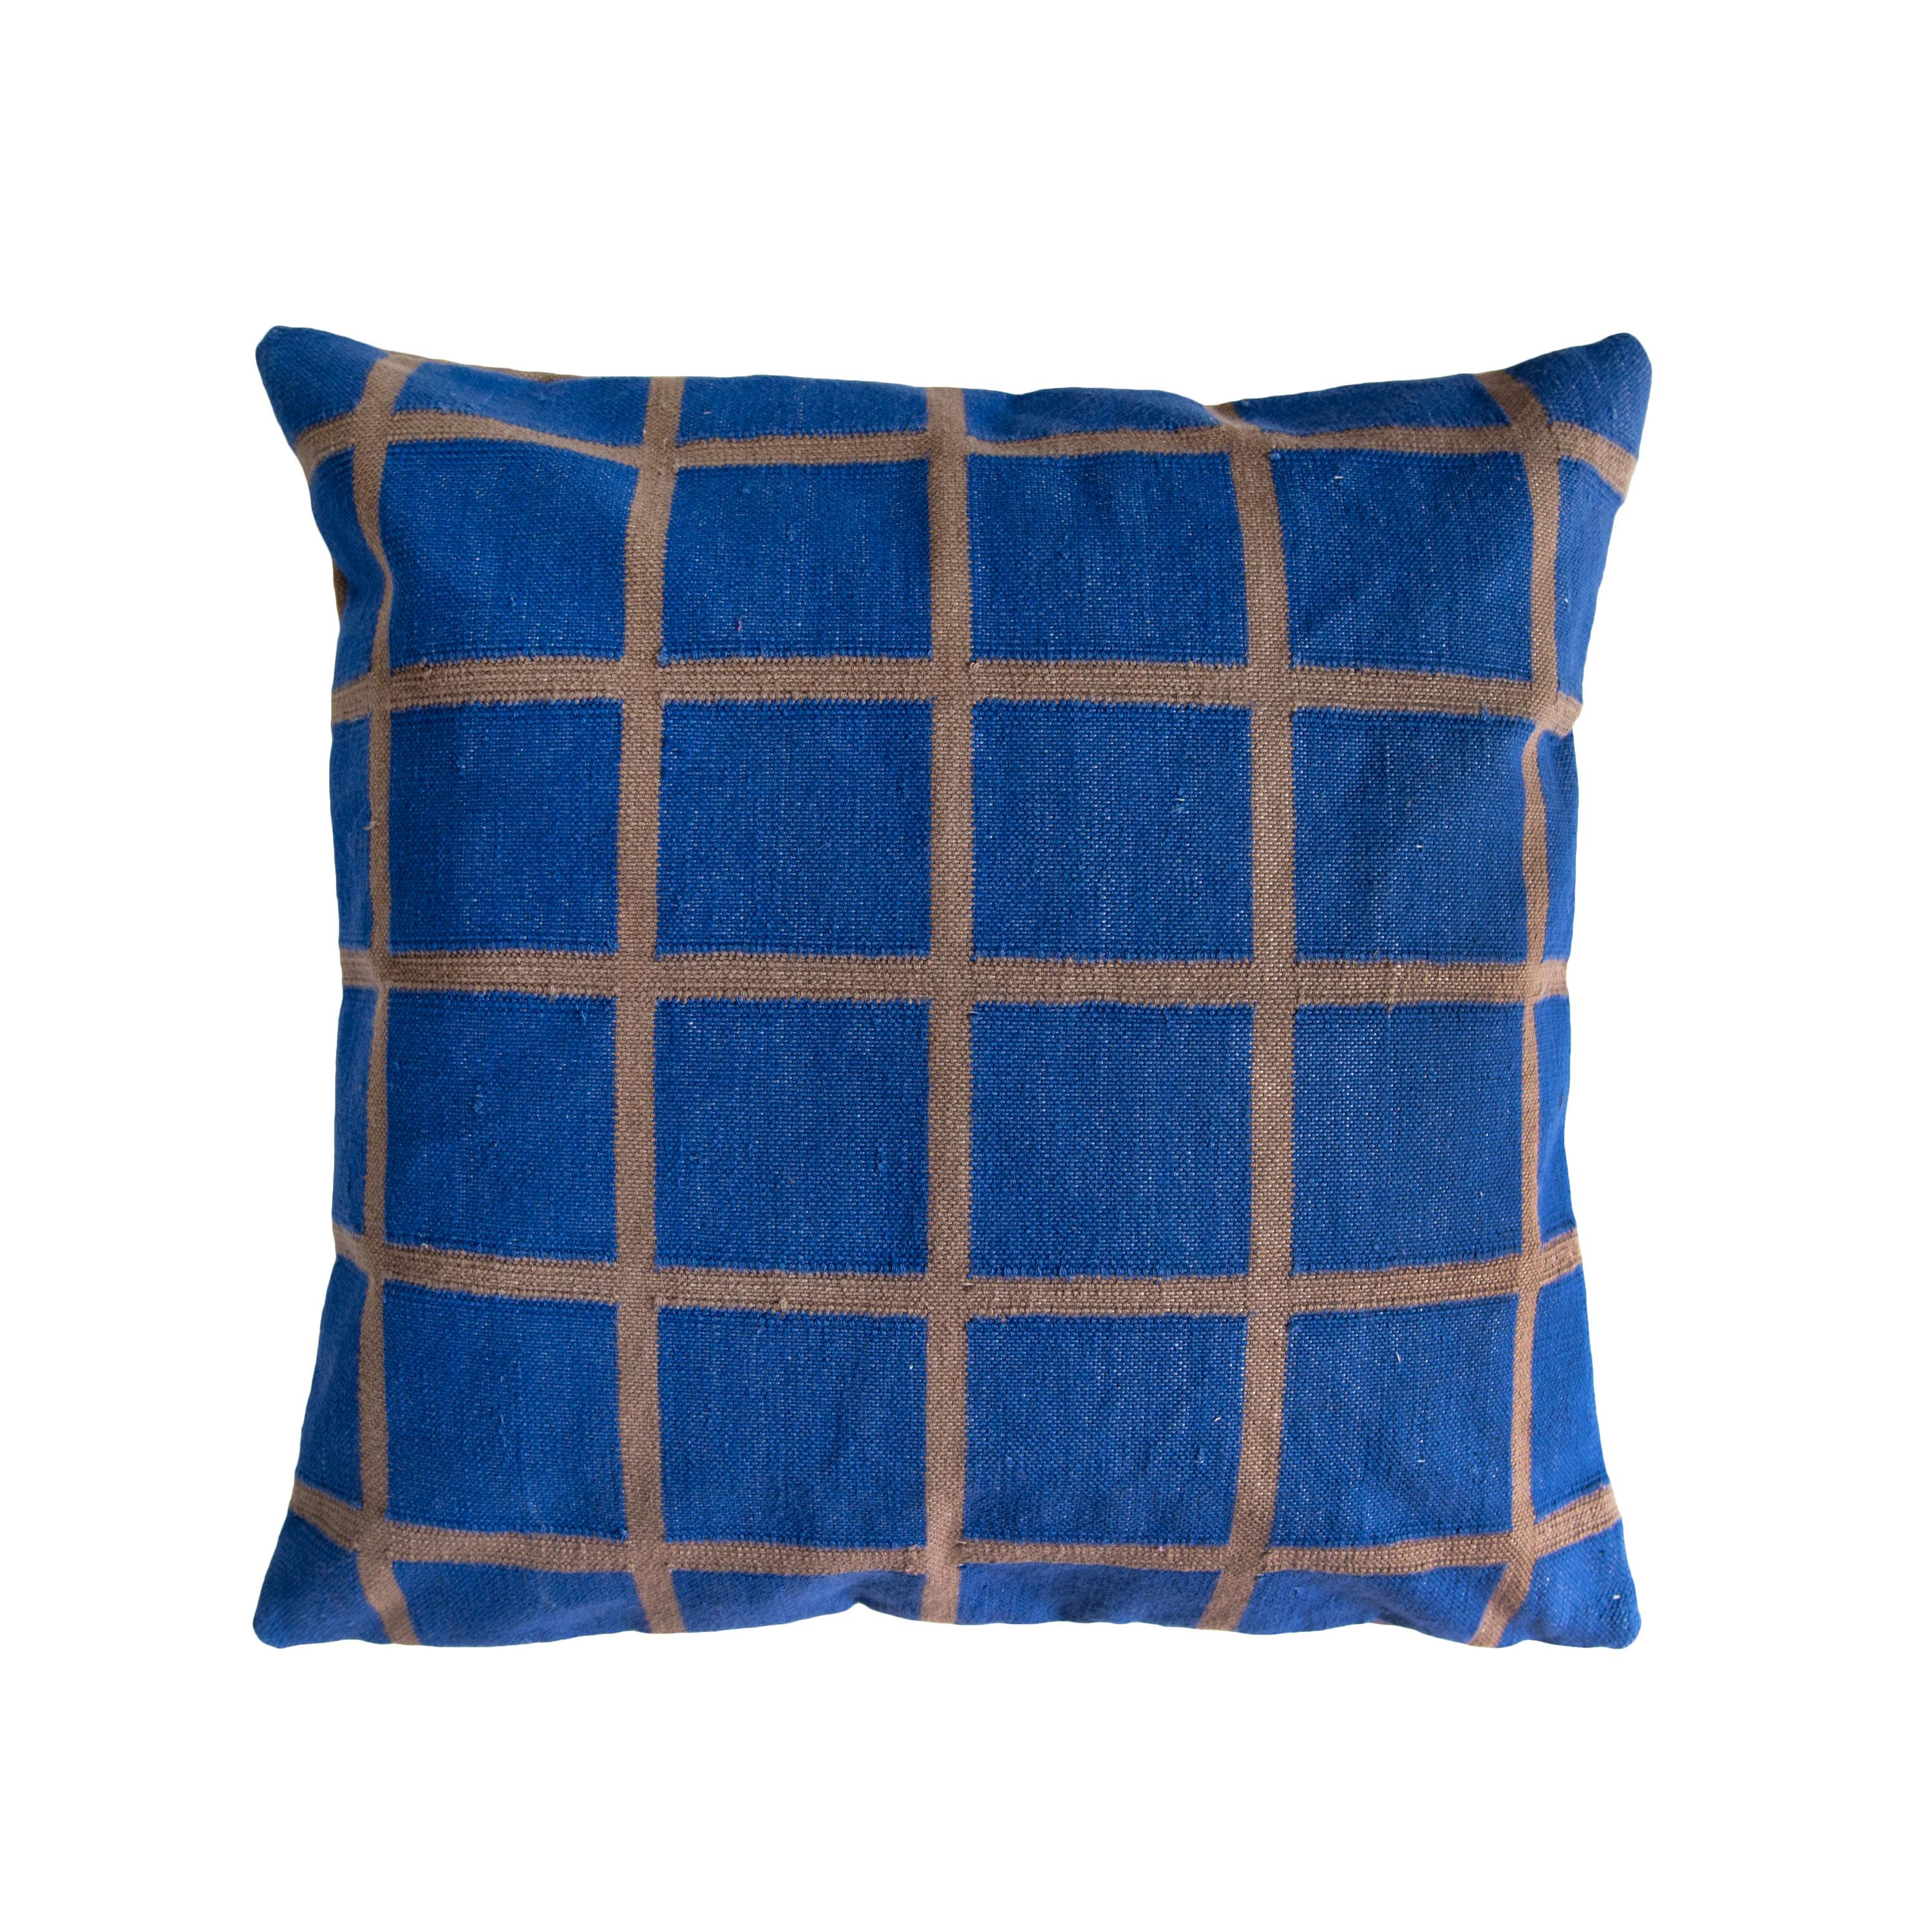 This pillow is reversible!

Our grid pillows are ethically hand woven by artisans in Rajasthan, India, using a traditional weaving technique which is native to this region.

The purchase of this handcrafted pillow helps to support the artisans and